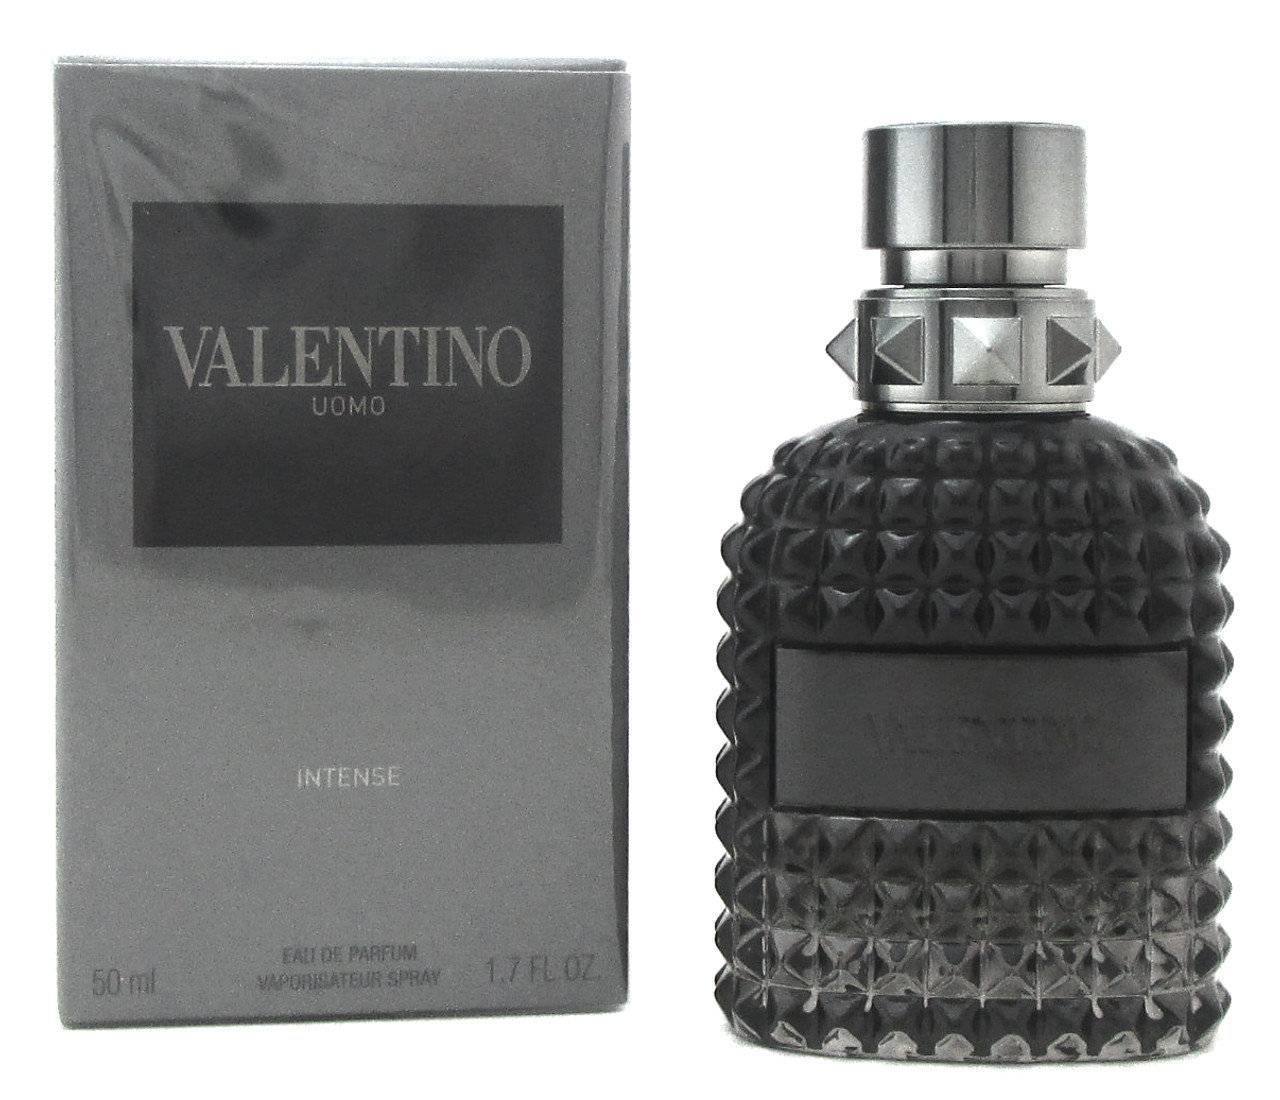 Valentino Uomo INTENSE by Valentino 1.7 oz. Eau de Parfum Spray for Men.  New Box - eDiscountPerfumes.com -FREE SHIPPING* From An Independent Seller  of 100% Authentic Brands Since 2006 (*standard shipping to 48 states)